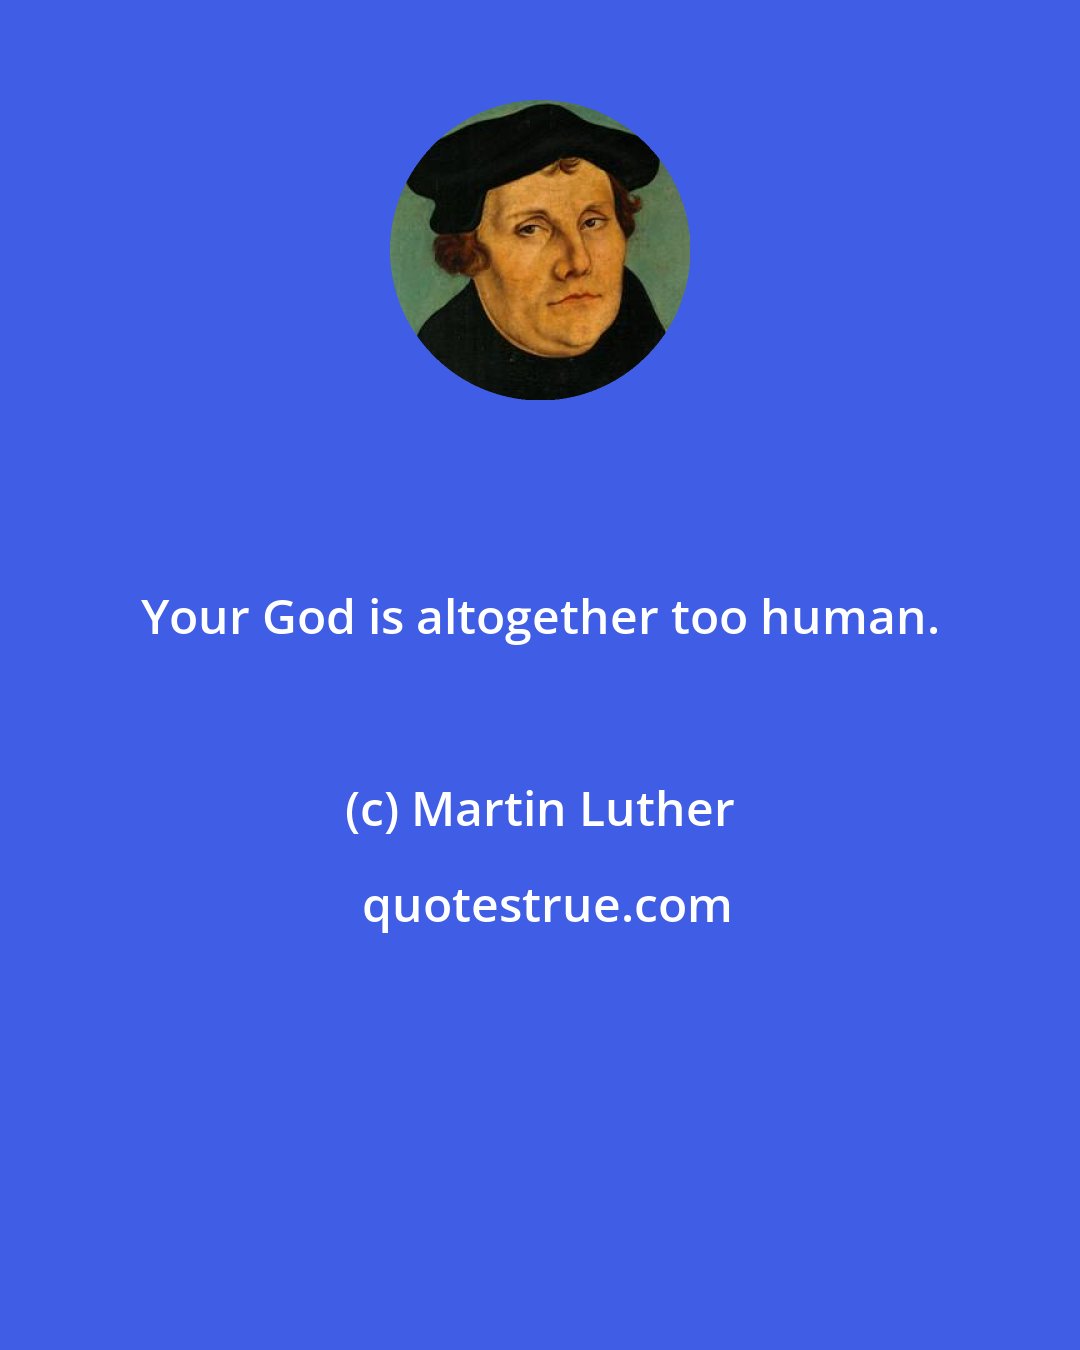 Martin Luther: Your God is altogether too human.